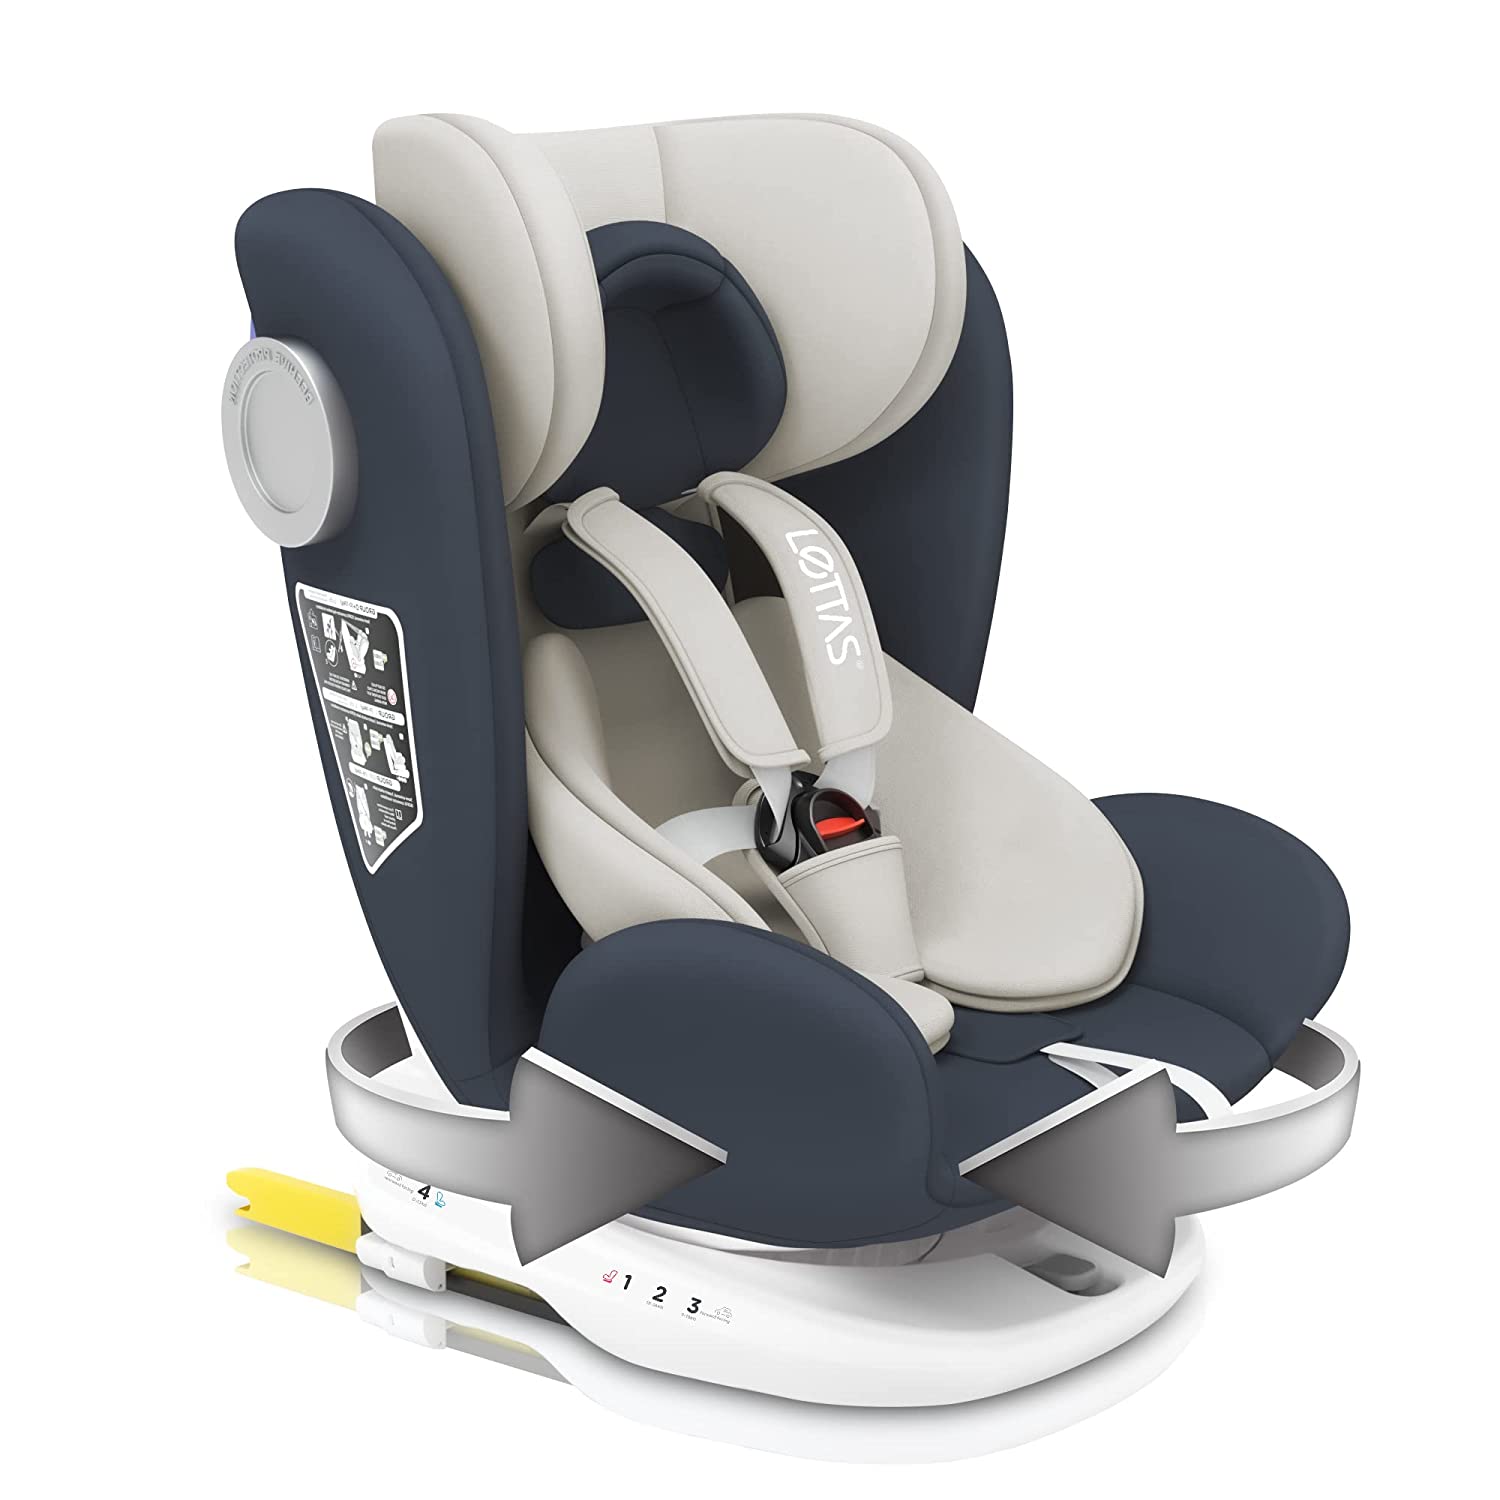 LETTAS Baby Child Seat 360 Degree Rotatable Isofix and Top Tether SIPS Group 0+/1/2/3, 0-12 Years, 0-36 kg, ECE R44/04, ADAC